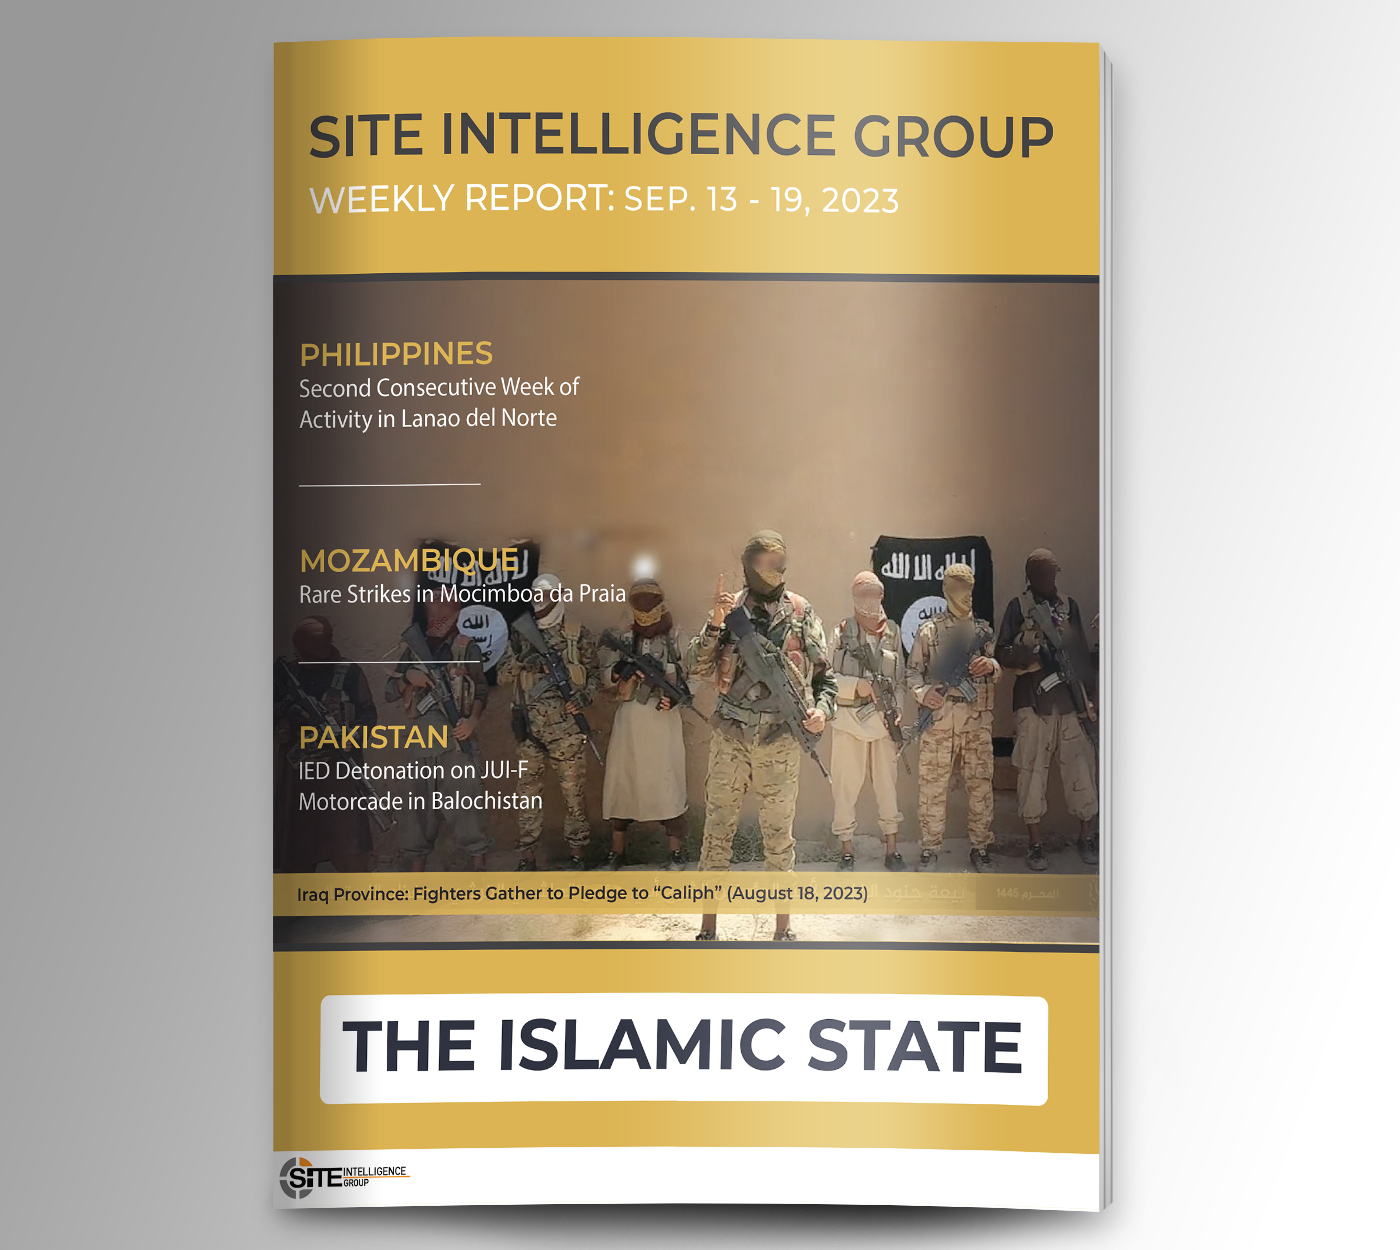 Weekly inSITE on the Islamic State for September 13-19, 2023